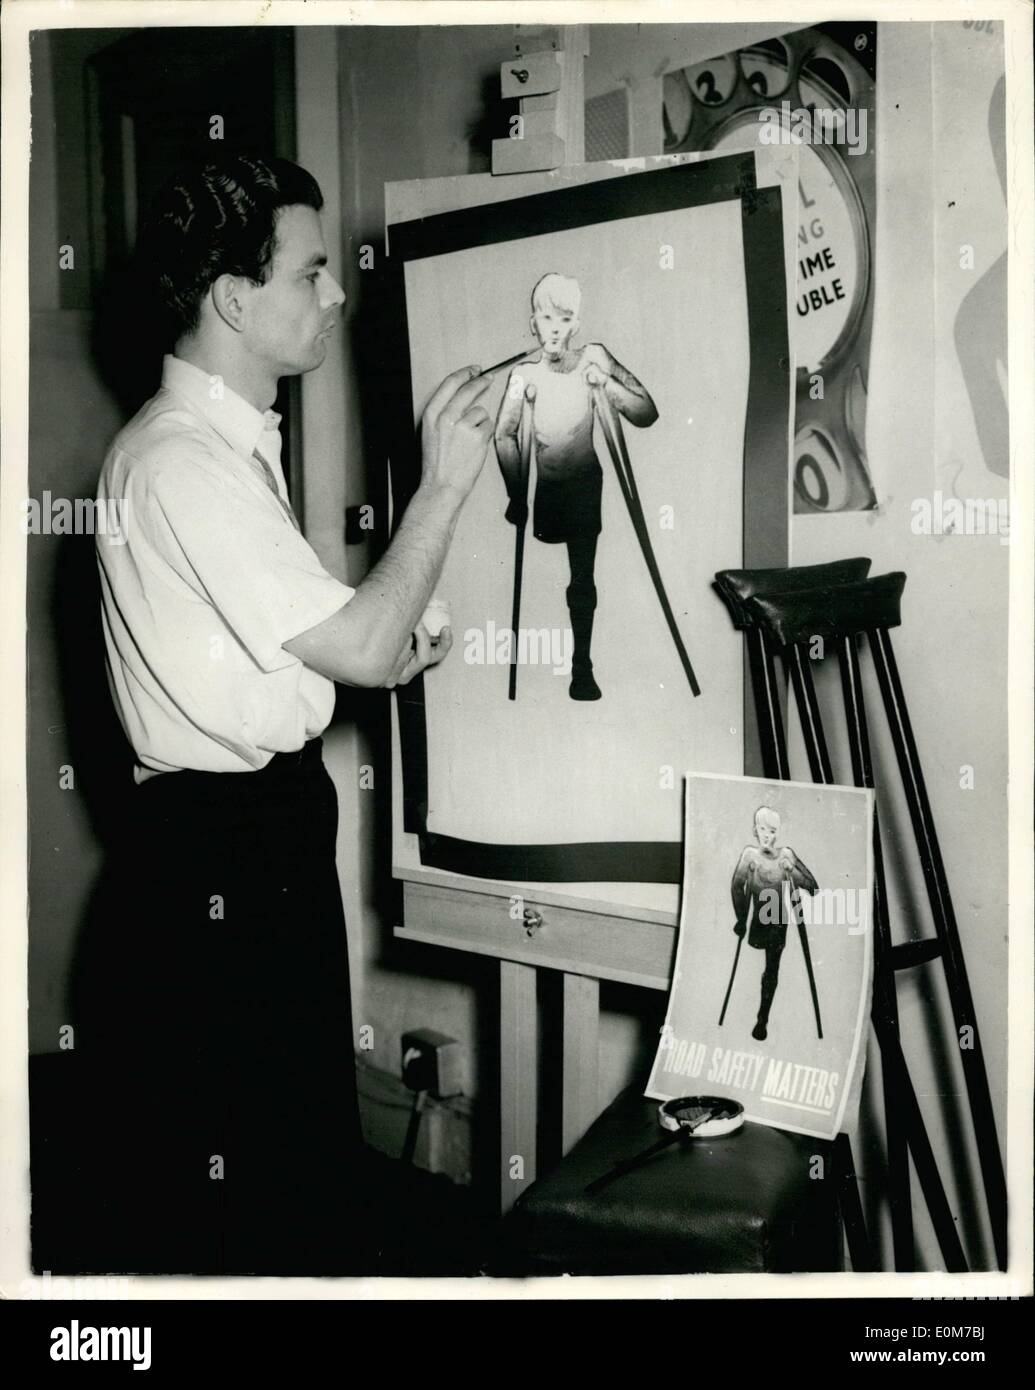 Oct. 10, 1953 - Artists Works On ''Horror Posters''. Hopes It Will Help Road Safety: Maurice Rickards - 33 year old Poster designer is at work on a porter that it is hoped will ''Shock Britain''. It is a poster of a limbless boy - and has been commissioned by the Royal Society for the Prevention of Accidents - and will be displayed in all parts of the country as part of the Society's battle against road accidents. It is thought that posters of this kind will help to create a greater road safety Stock Photo